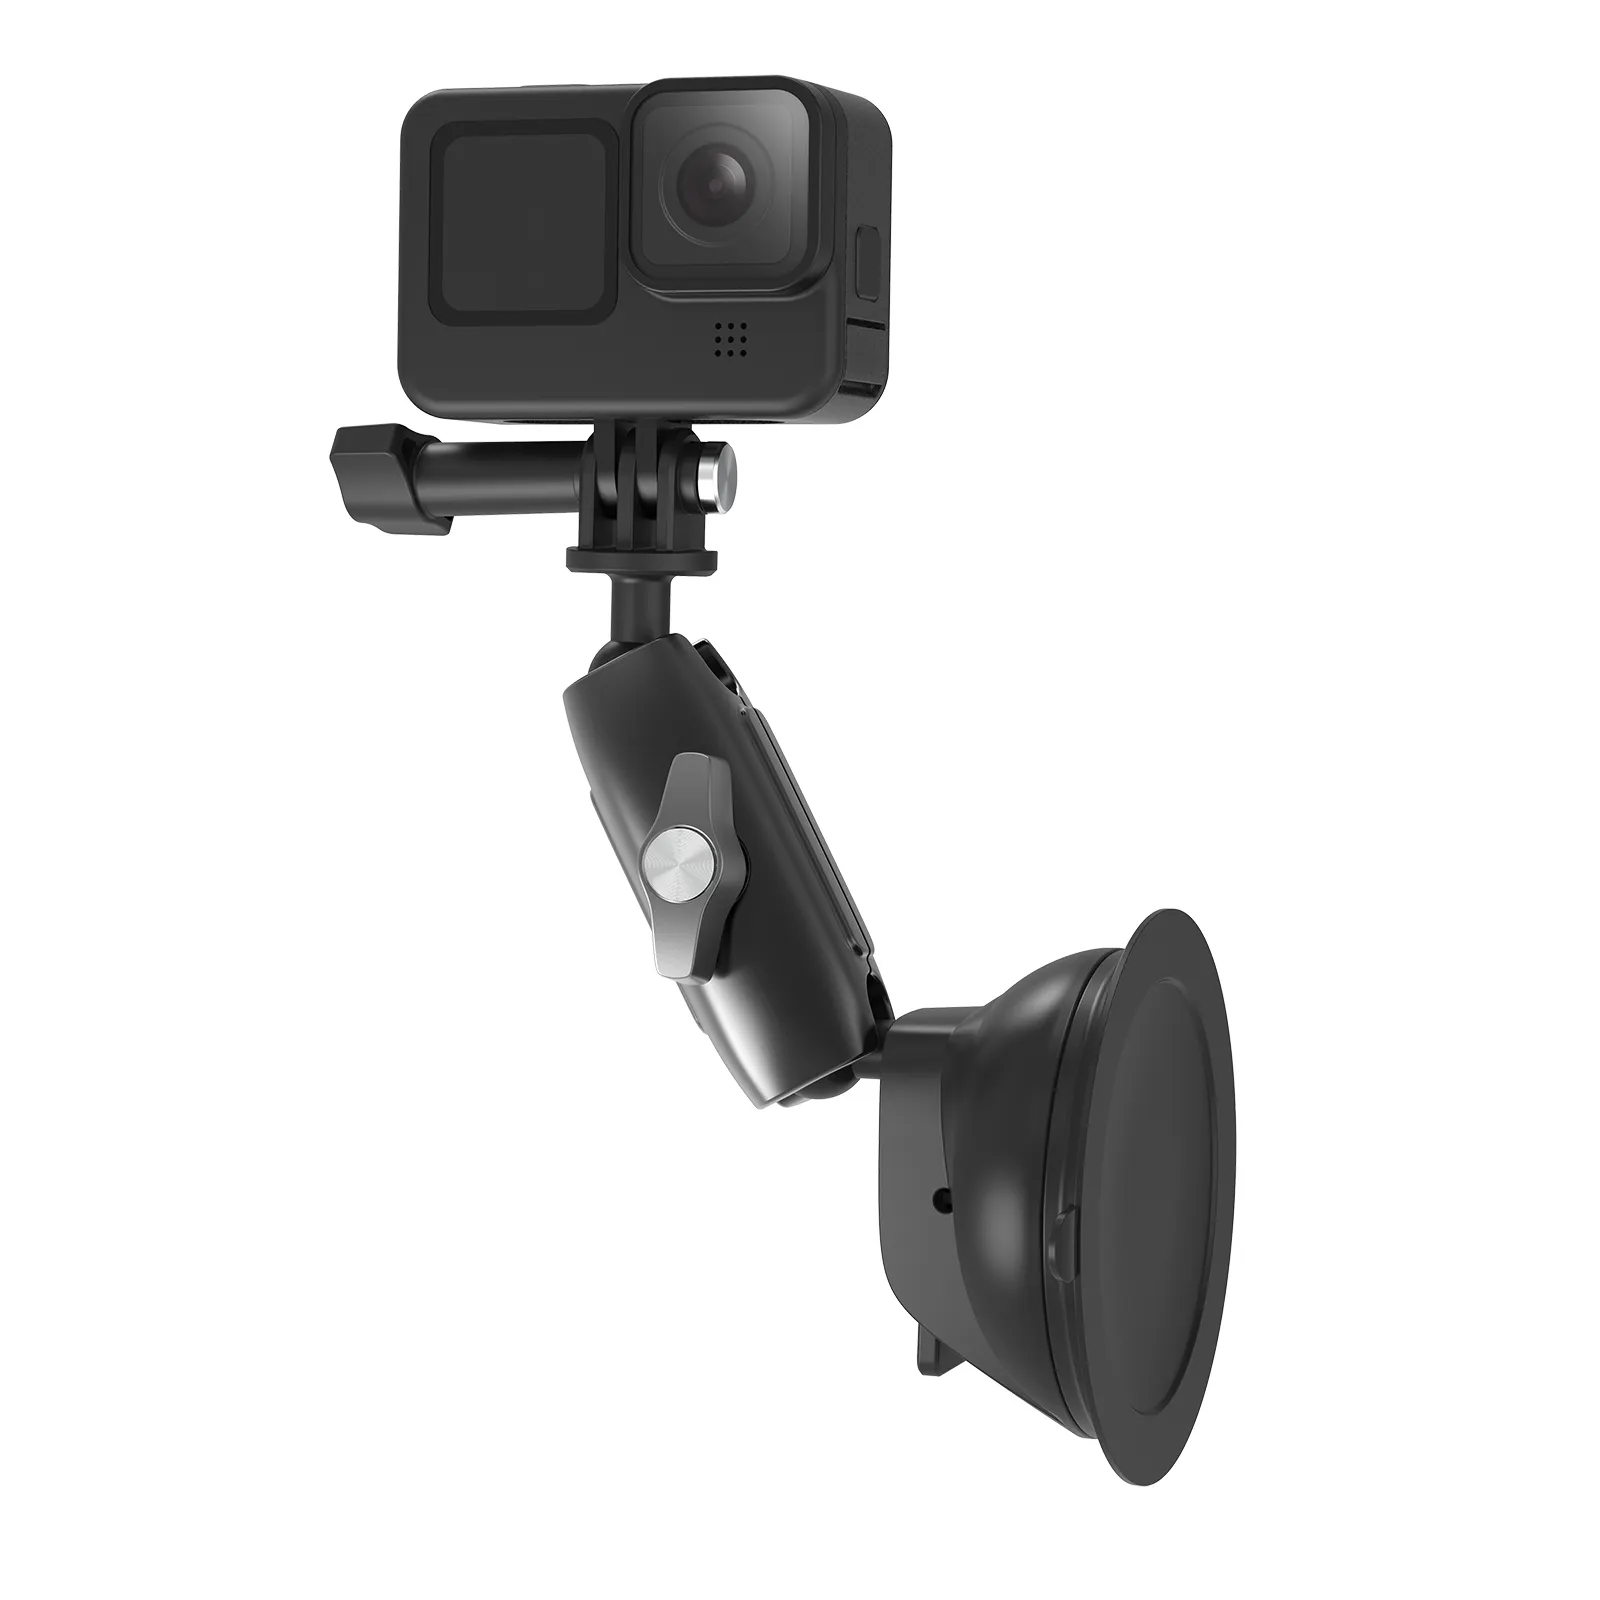 TELESIN Aluminum Alloy 360 Rotary Foldable Suction cup Mount Diameter 8.45cm for GoPro/For DJI Action Camera